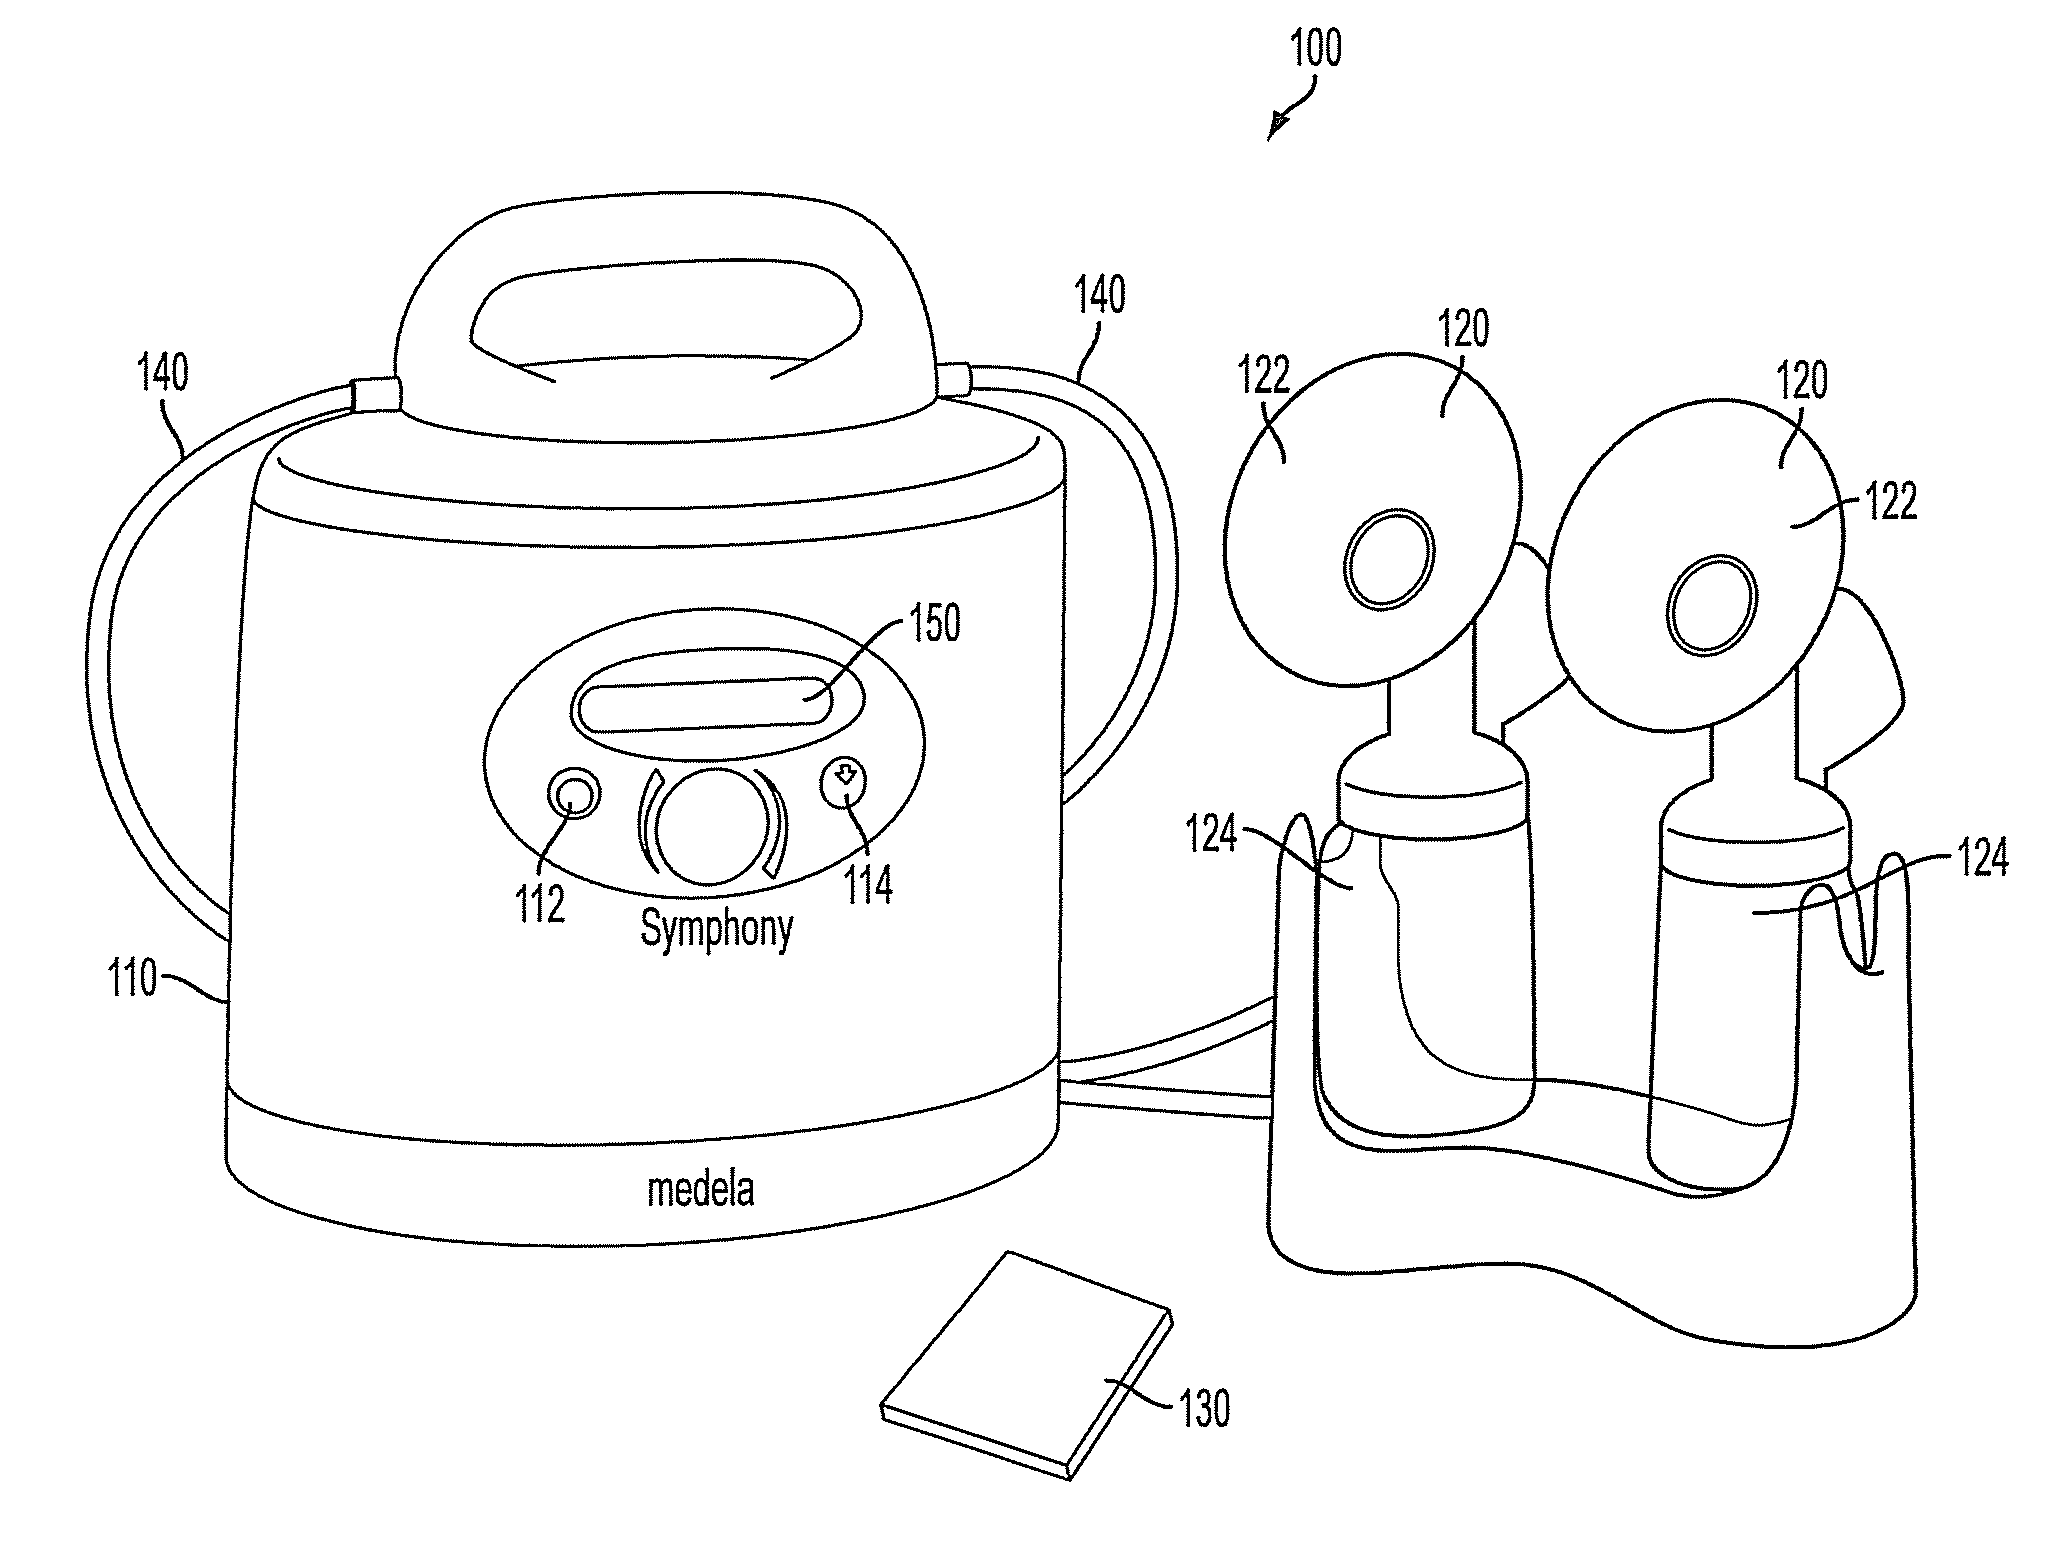 Process for use with breastpump to initiate milk in breastfeeding, particularly for premature infants